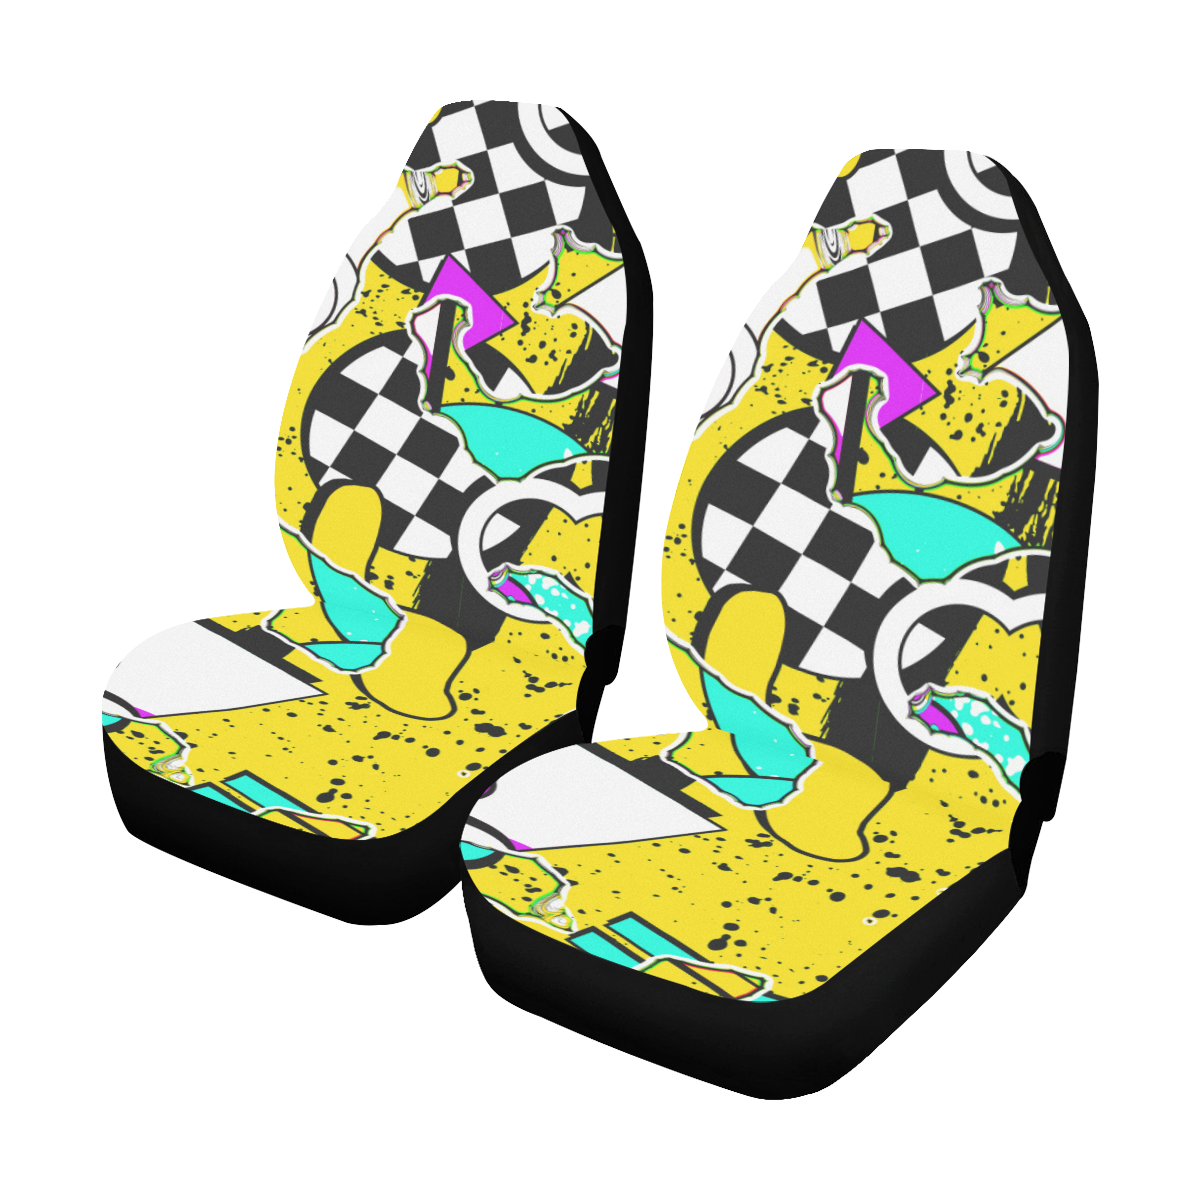 Shapes on a yellow background Car Seat Covers (Set of 2)